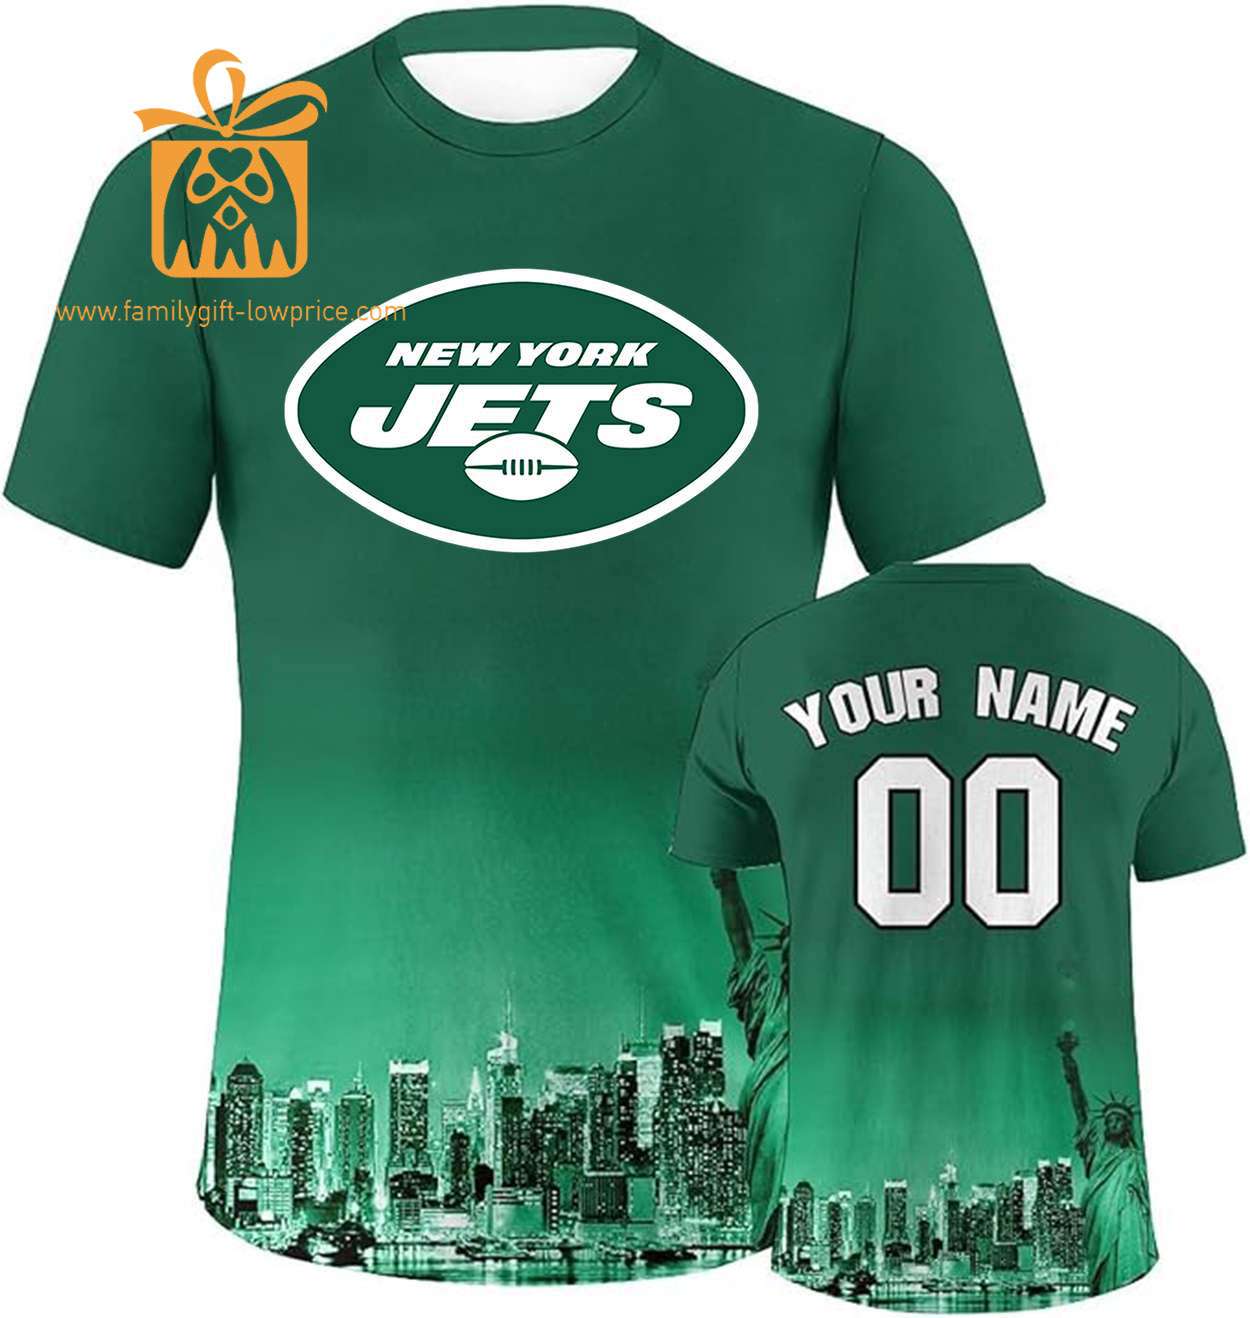 New York Jets Custom Football Shirts - Personalized Name & Number, Ideal for Fans